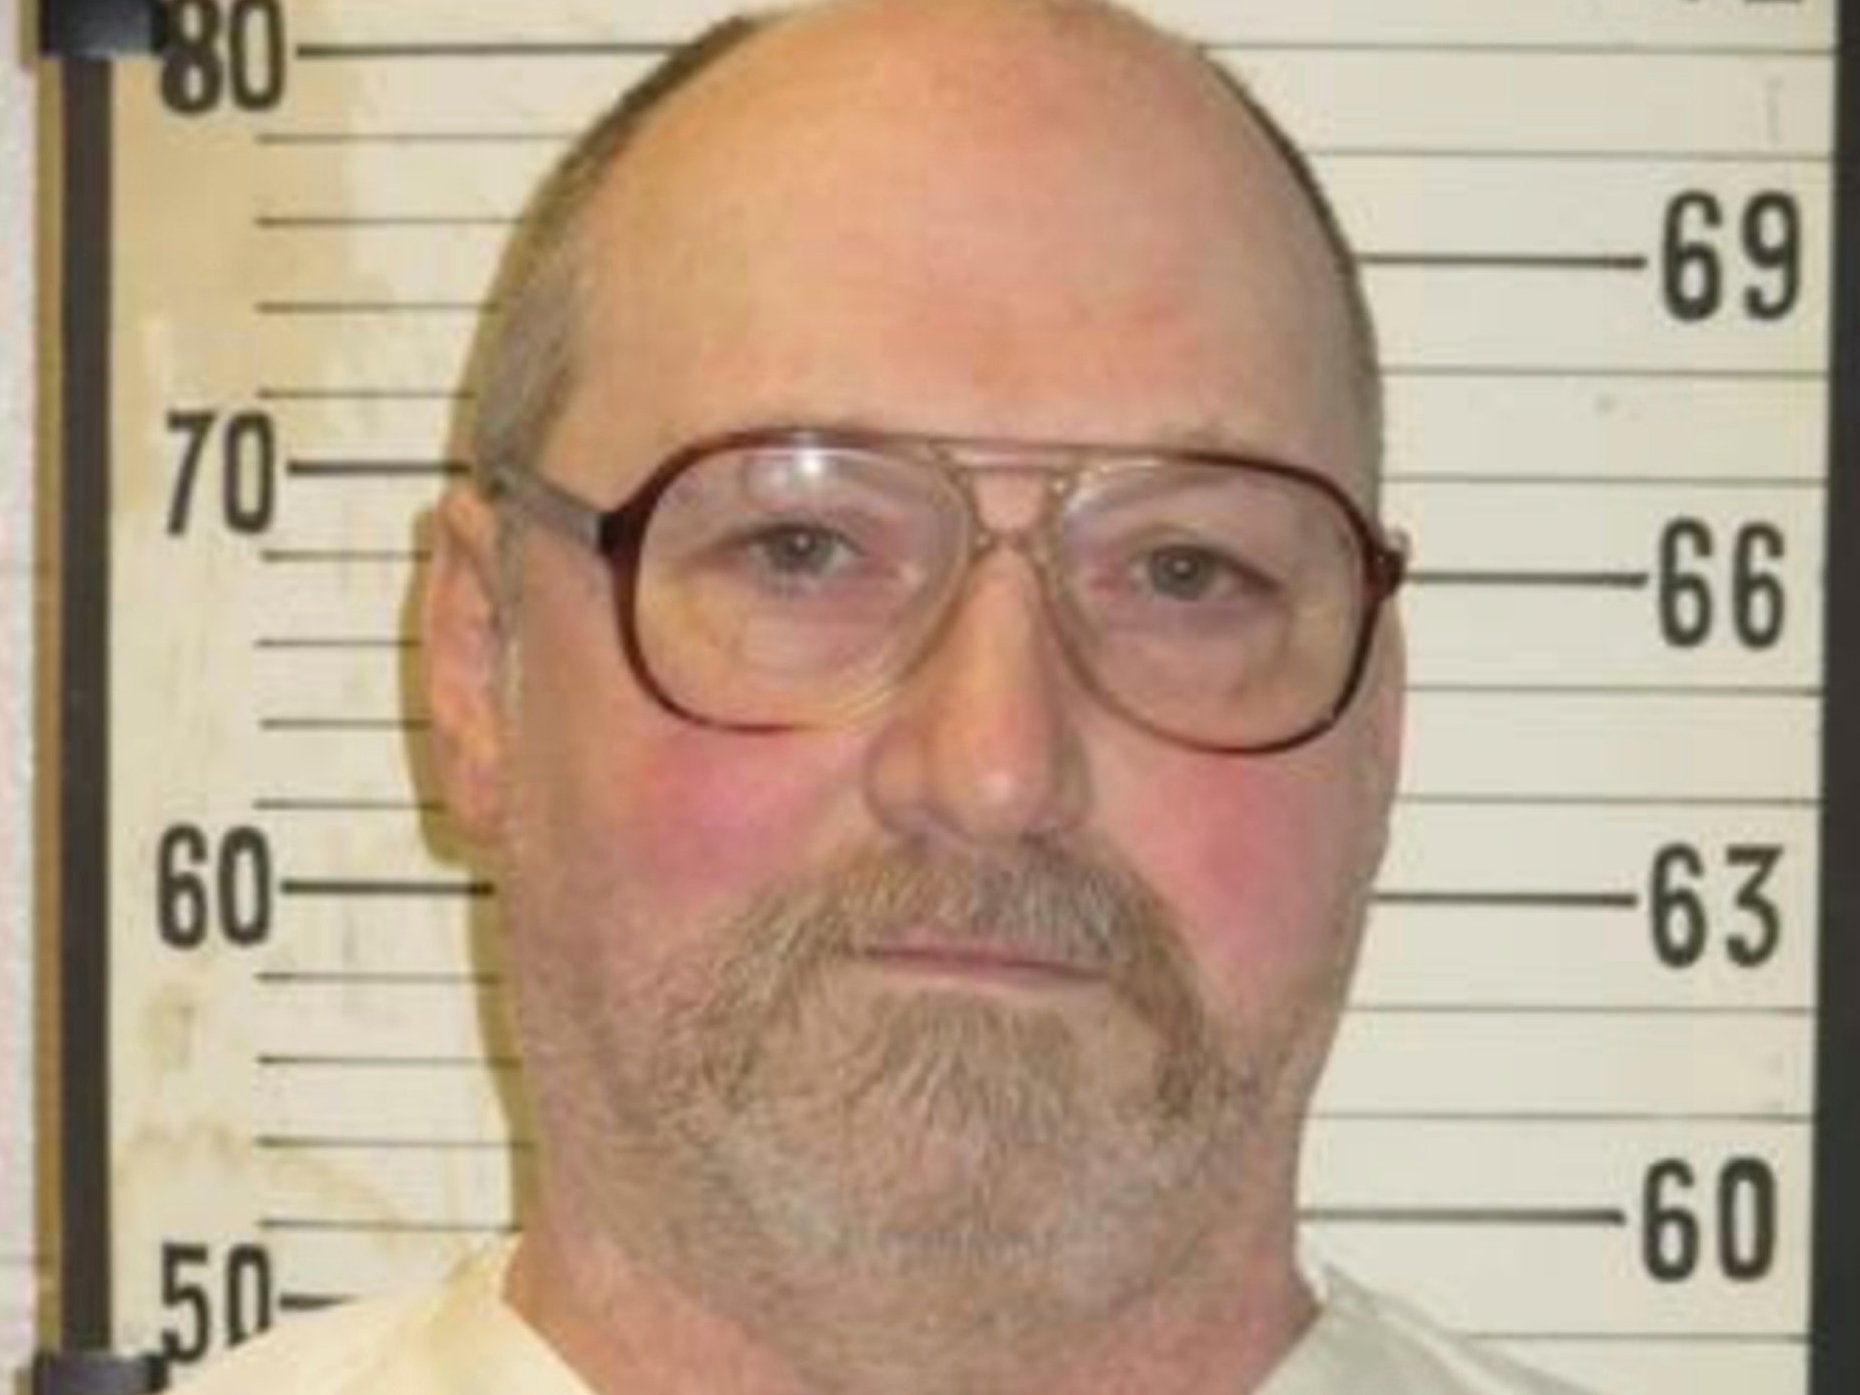 David Earl Miller is scheduled to be executed on 6 December